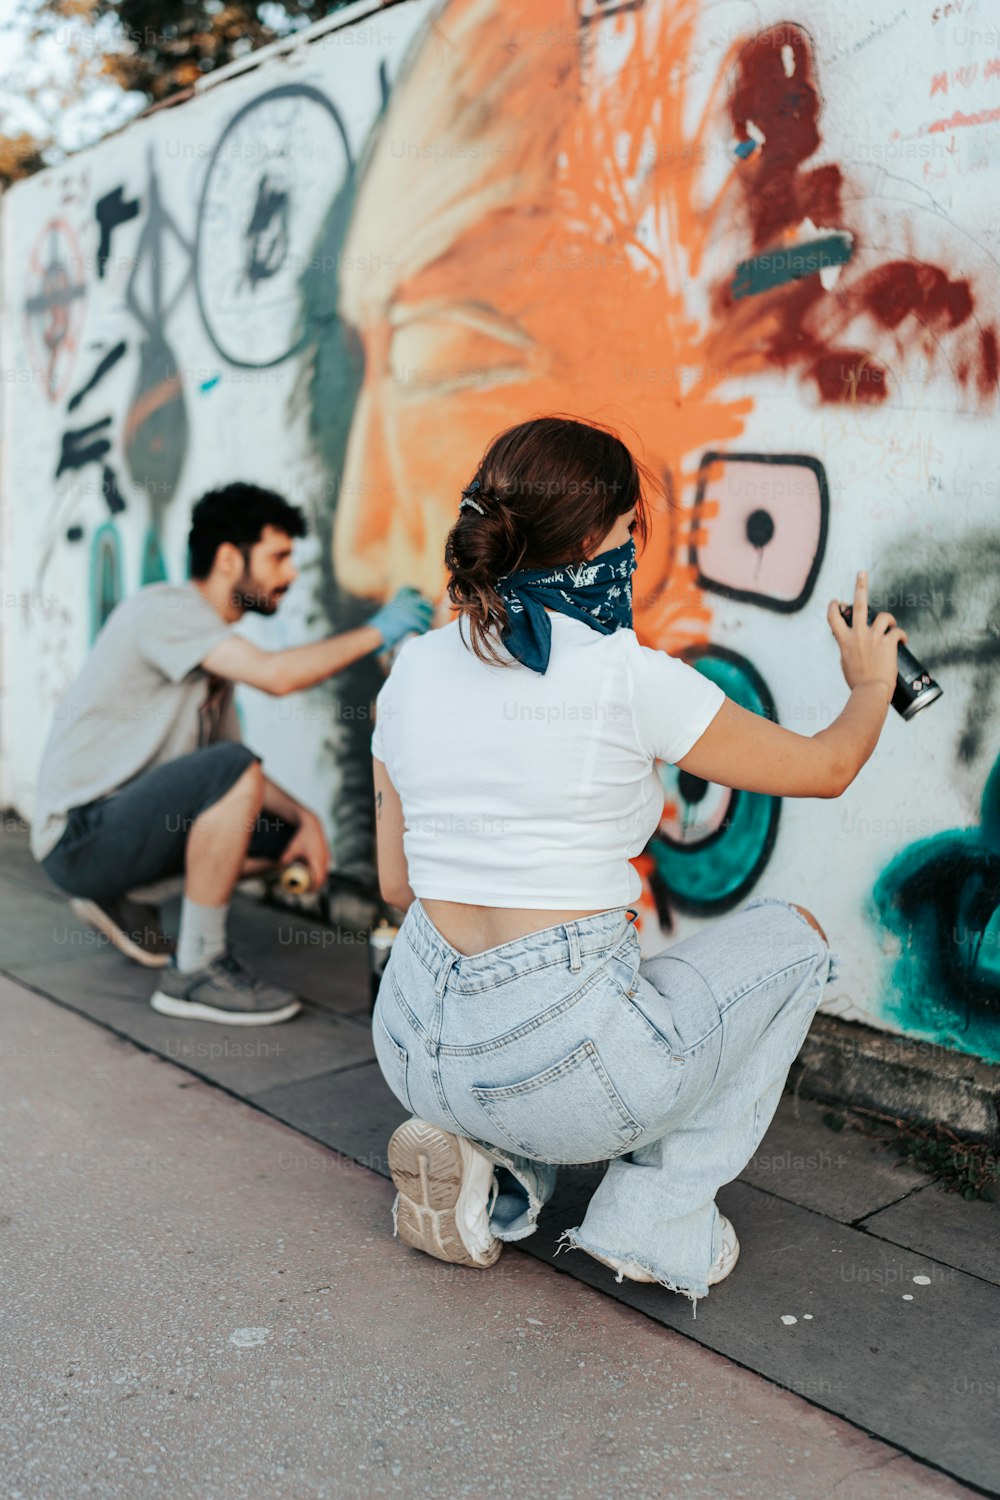 a man and a woman painting a wall with graffiti